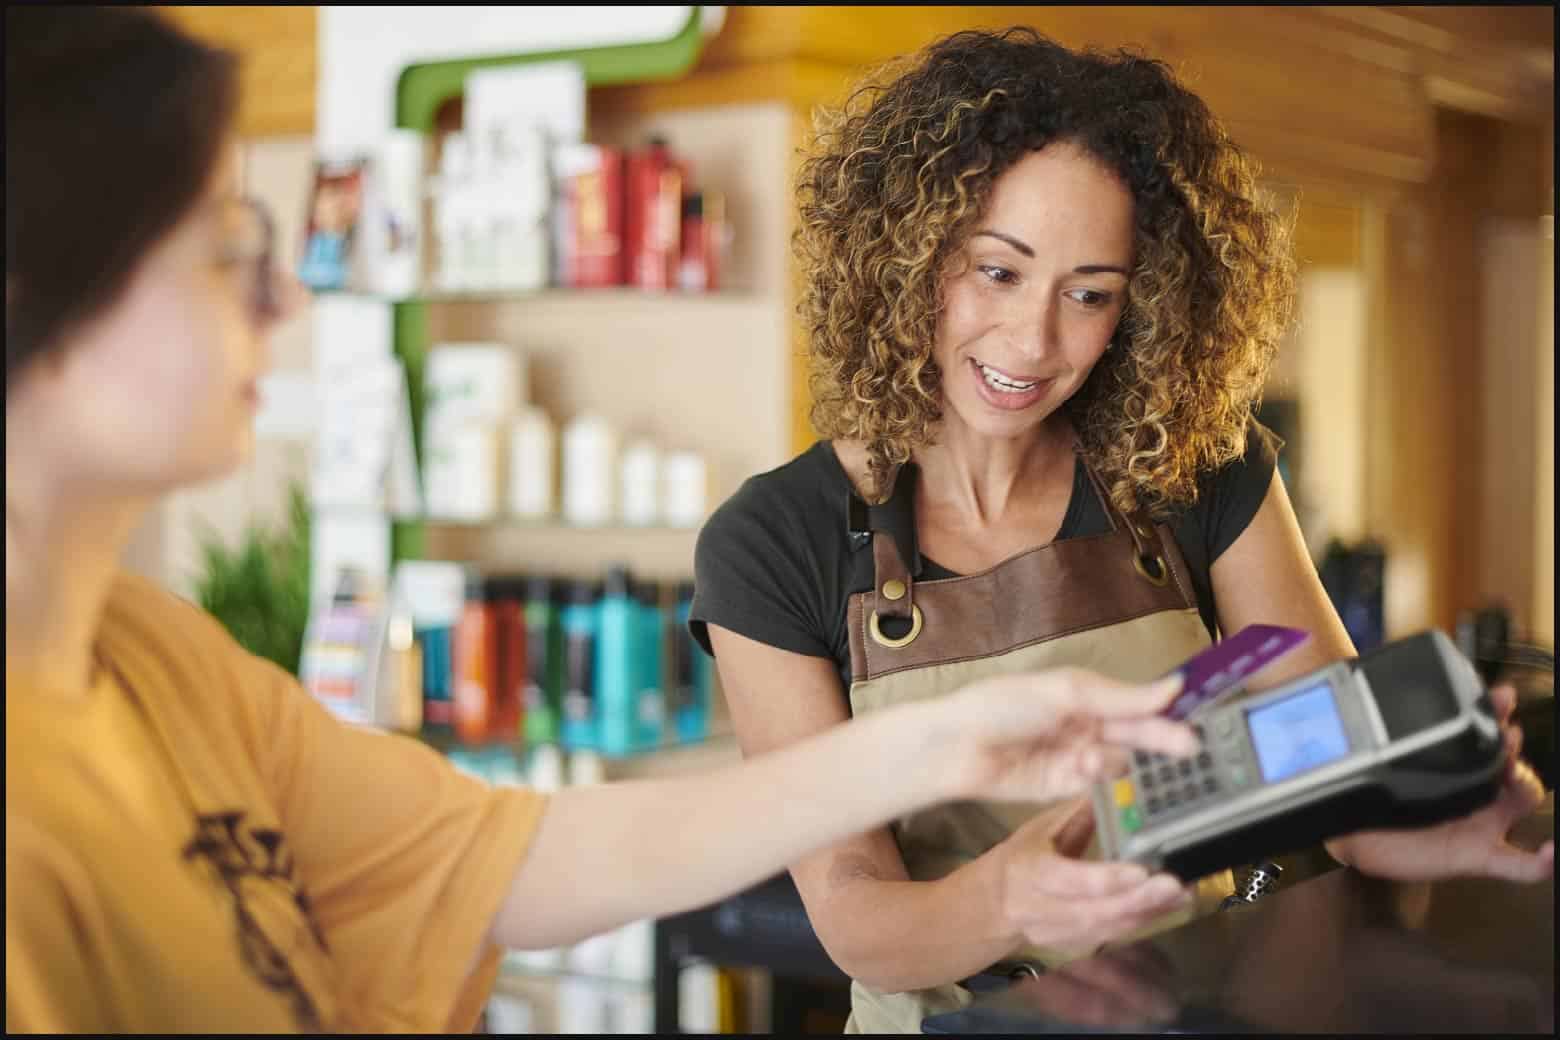 client wearing yellow shirt and glasses paying a salon owner with a credit card, salon owner wearing a black shirt and a smock is holding the card reader